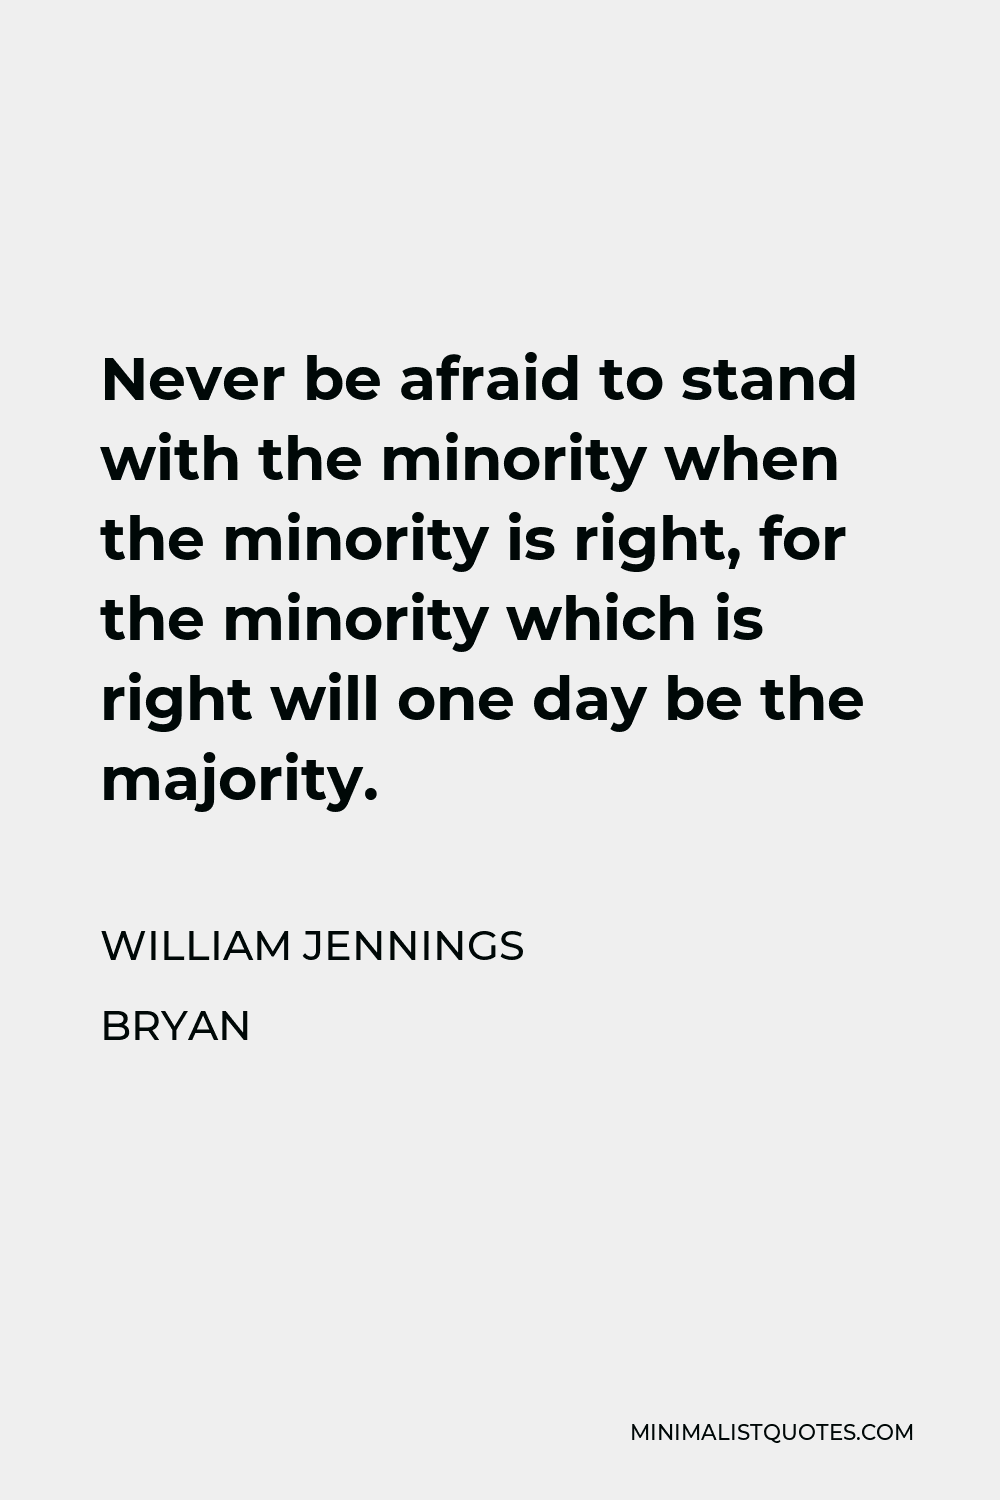 William Jennings Bryan Quote - Never be afraid to stand with the minority when the minority is right, for the minority which is right will one day be the majority.